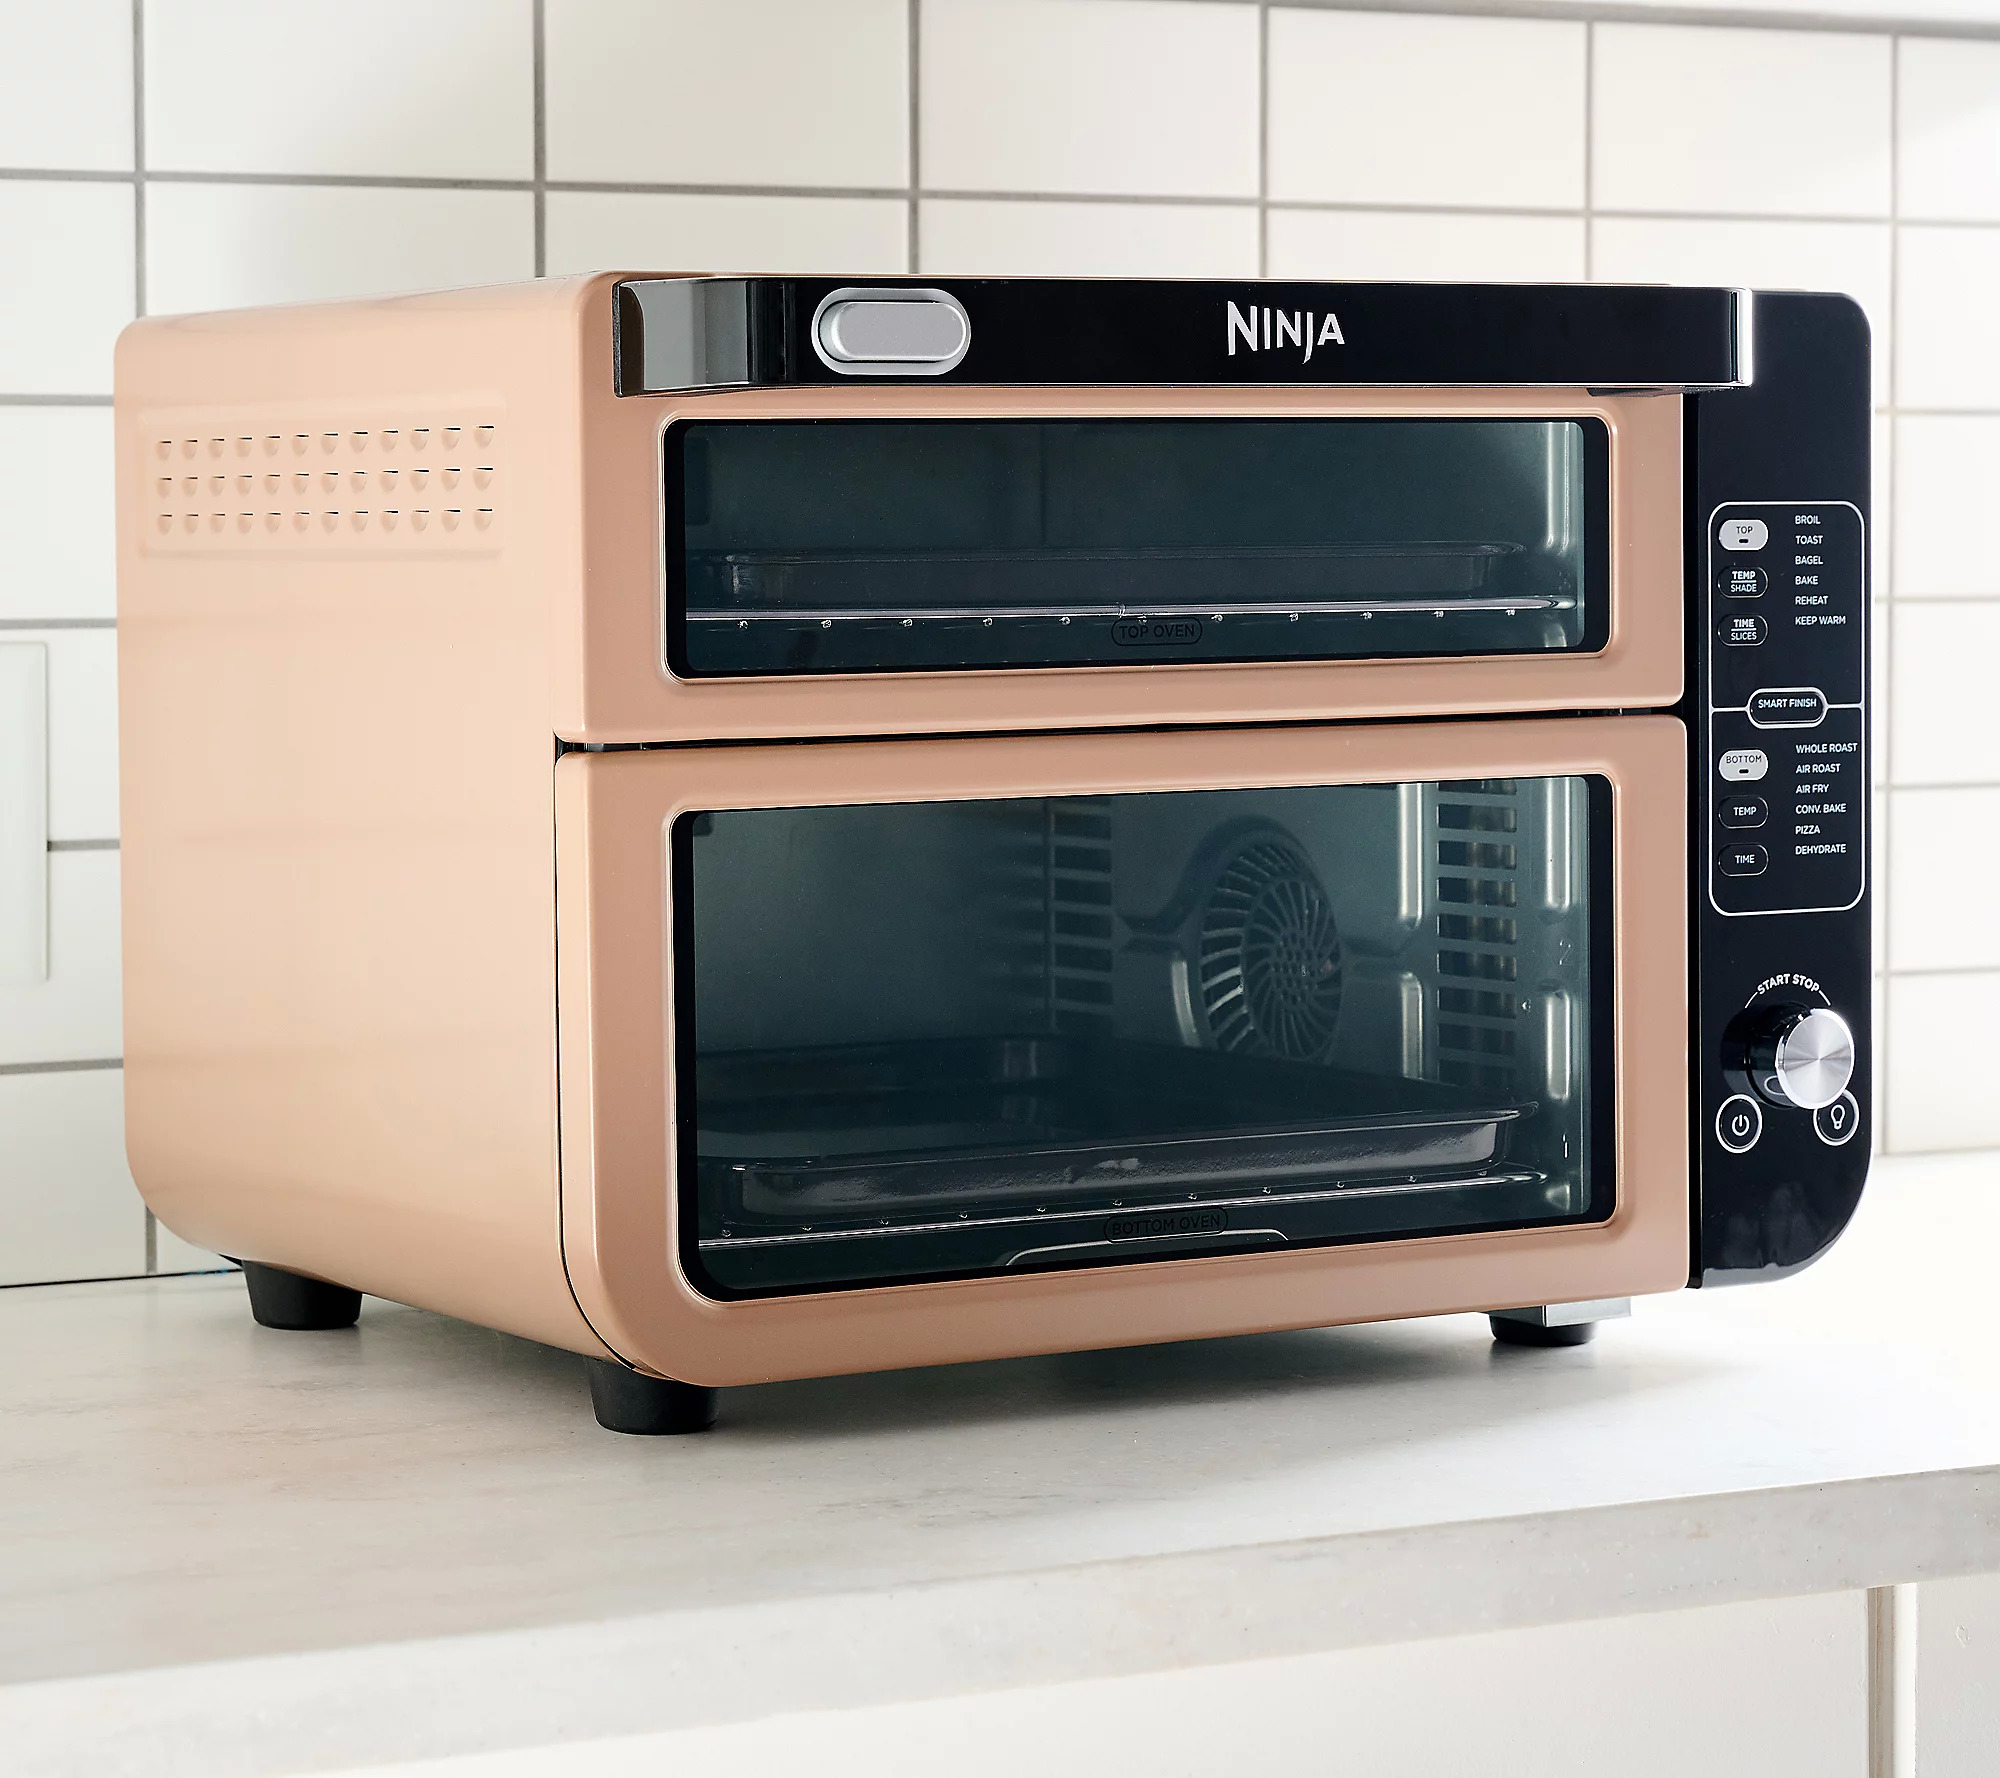 QVC New Customers: Ninja 12-in-1 Rapid Cook & Convection Double Oven $219.98 + Free S&H (10/22 Only)